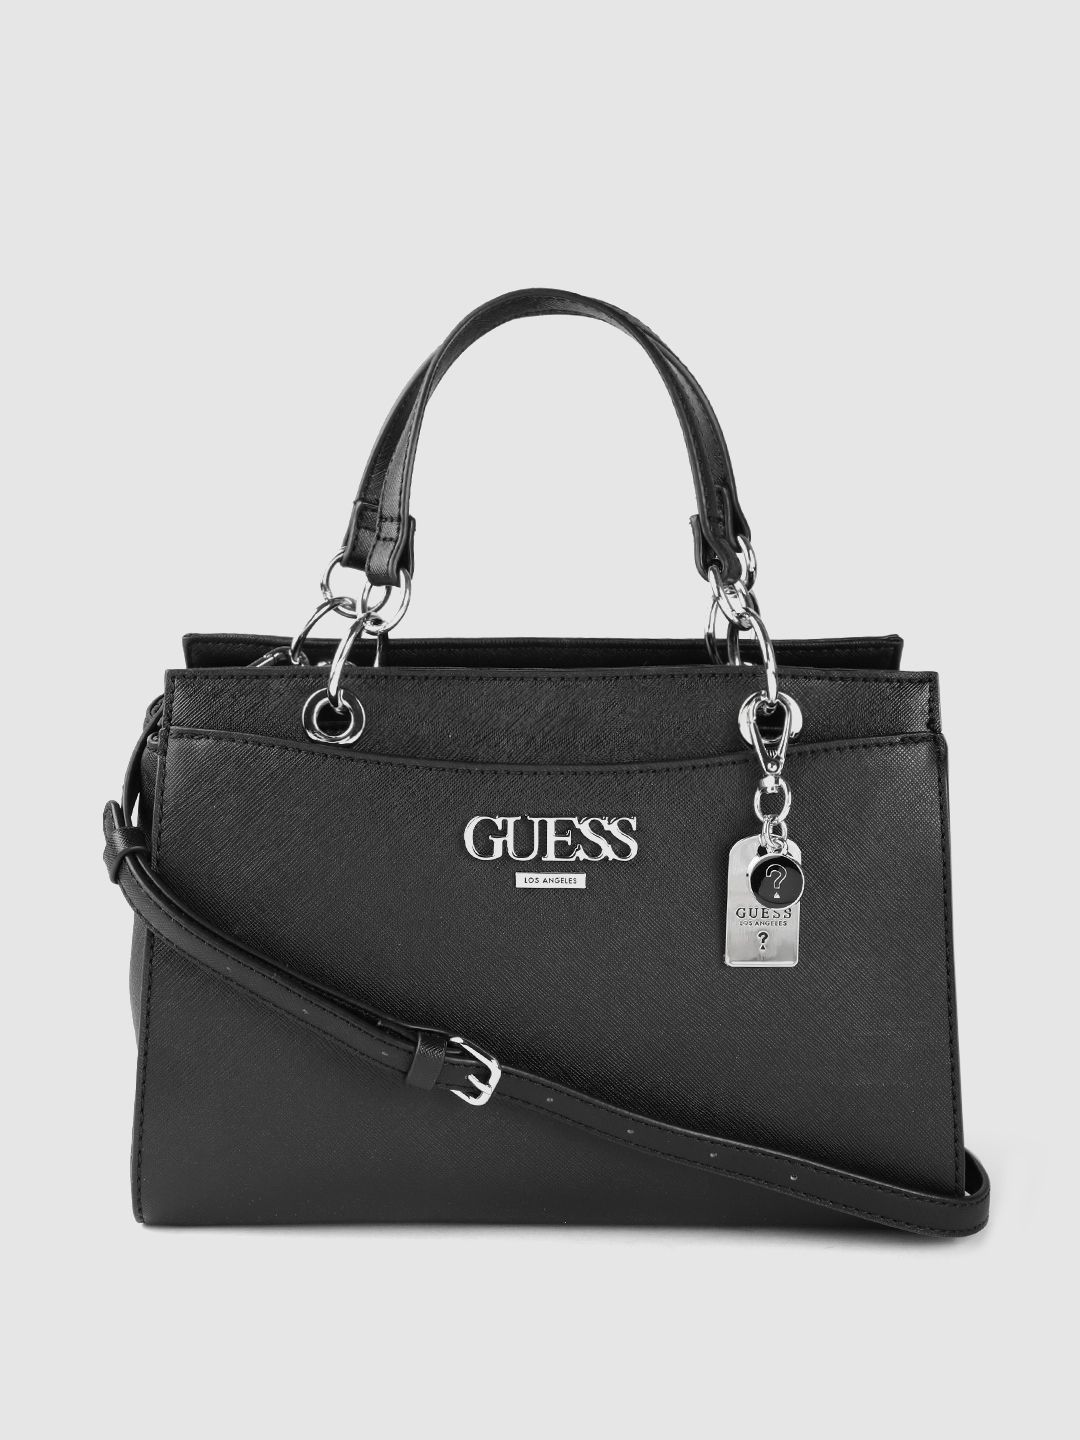 GUESS Black Solid Structured Handheld Bag Price in India